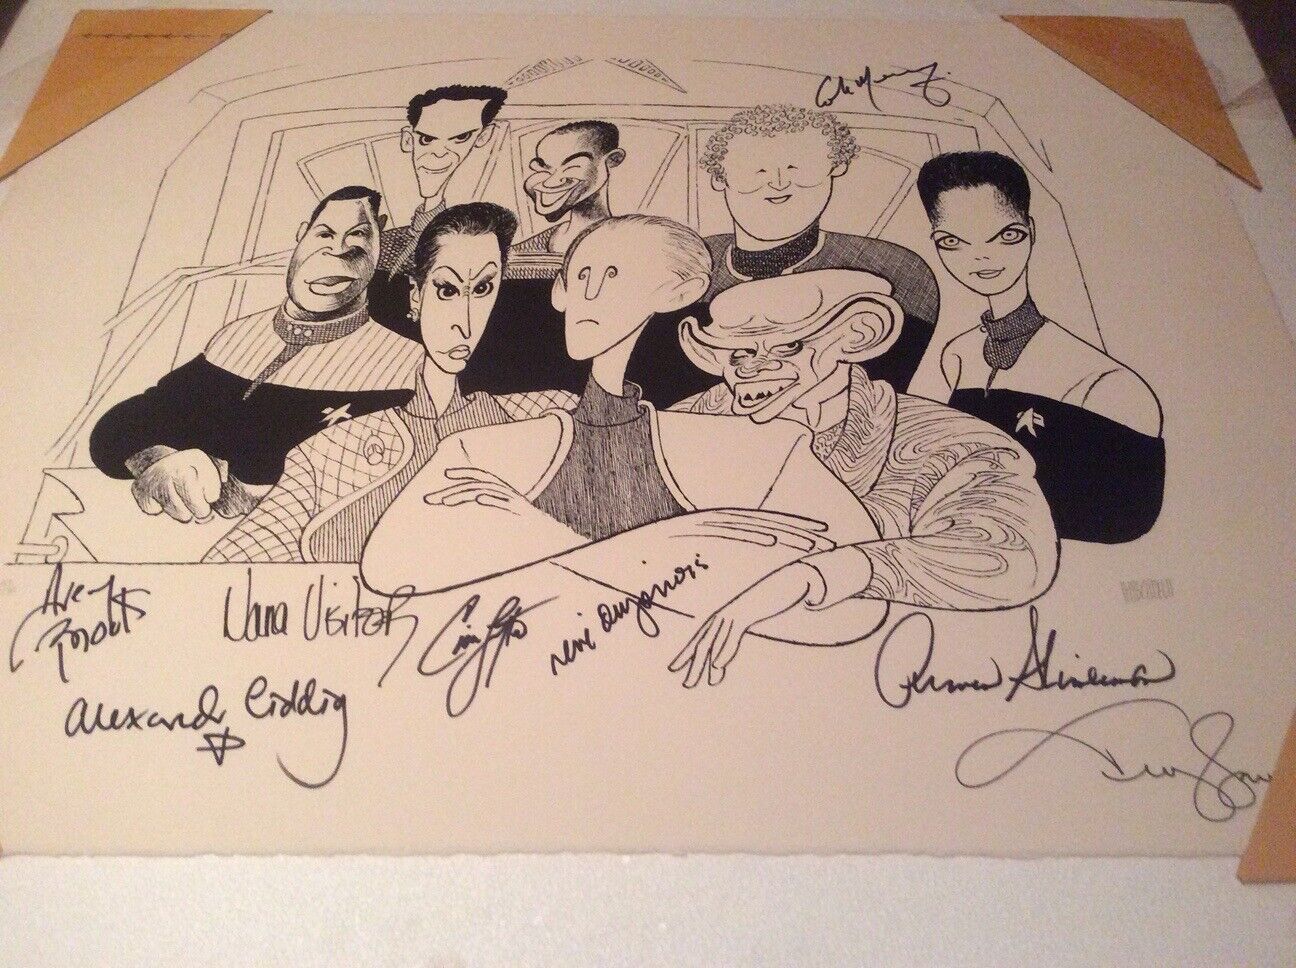 Star Trek DS9 - cast signed numbered limited edition lithograph by Al Hirschfeld